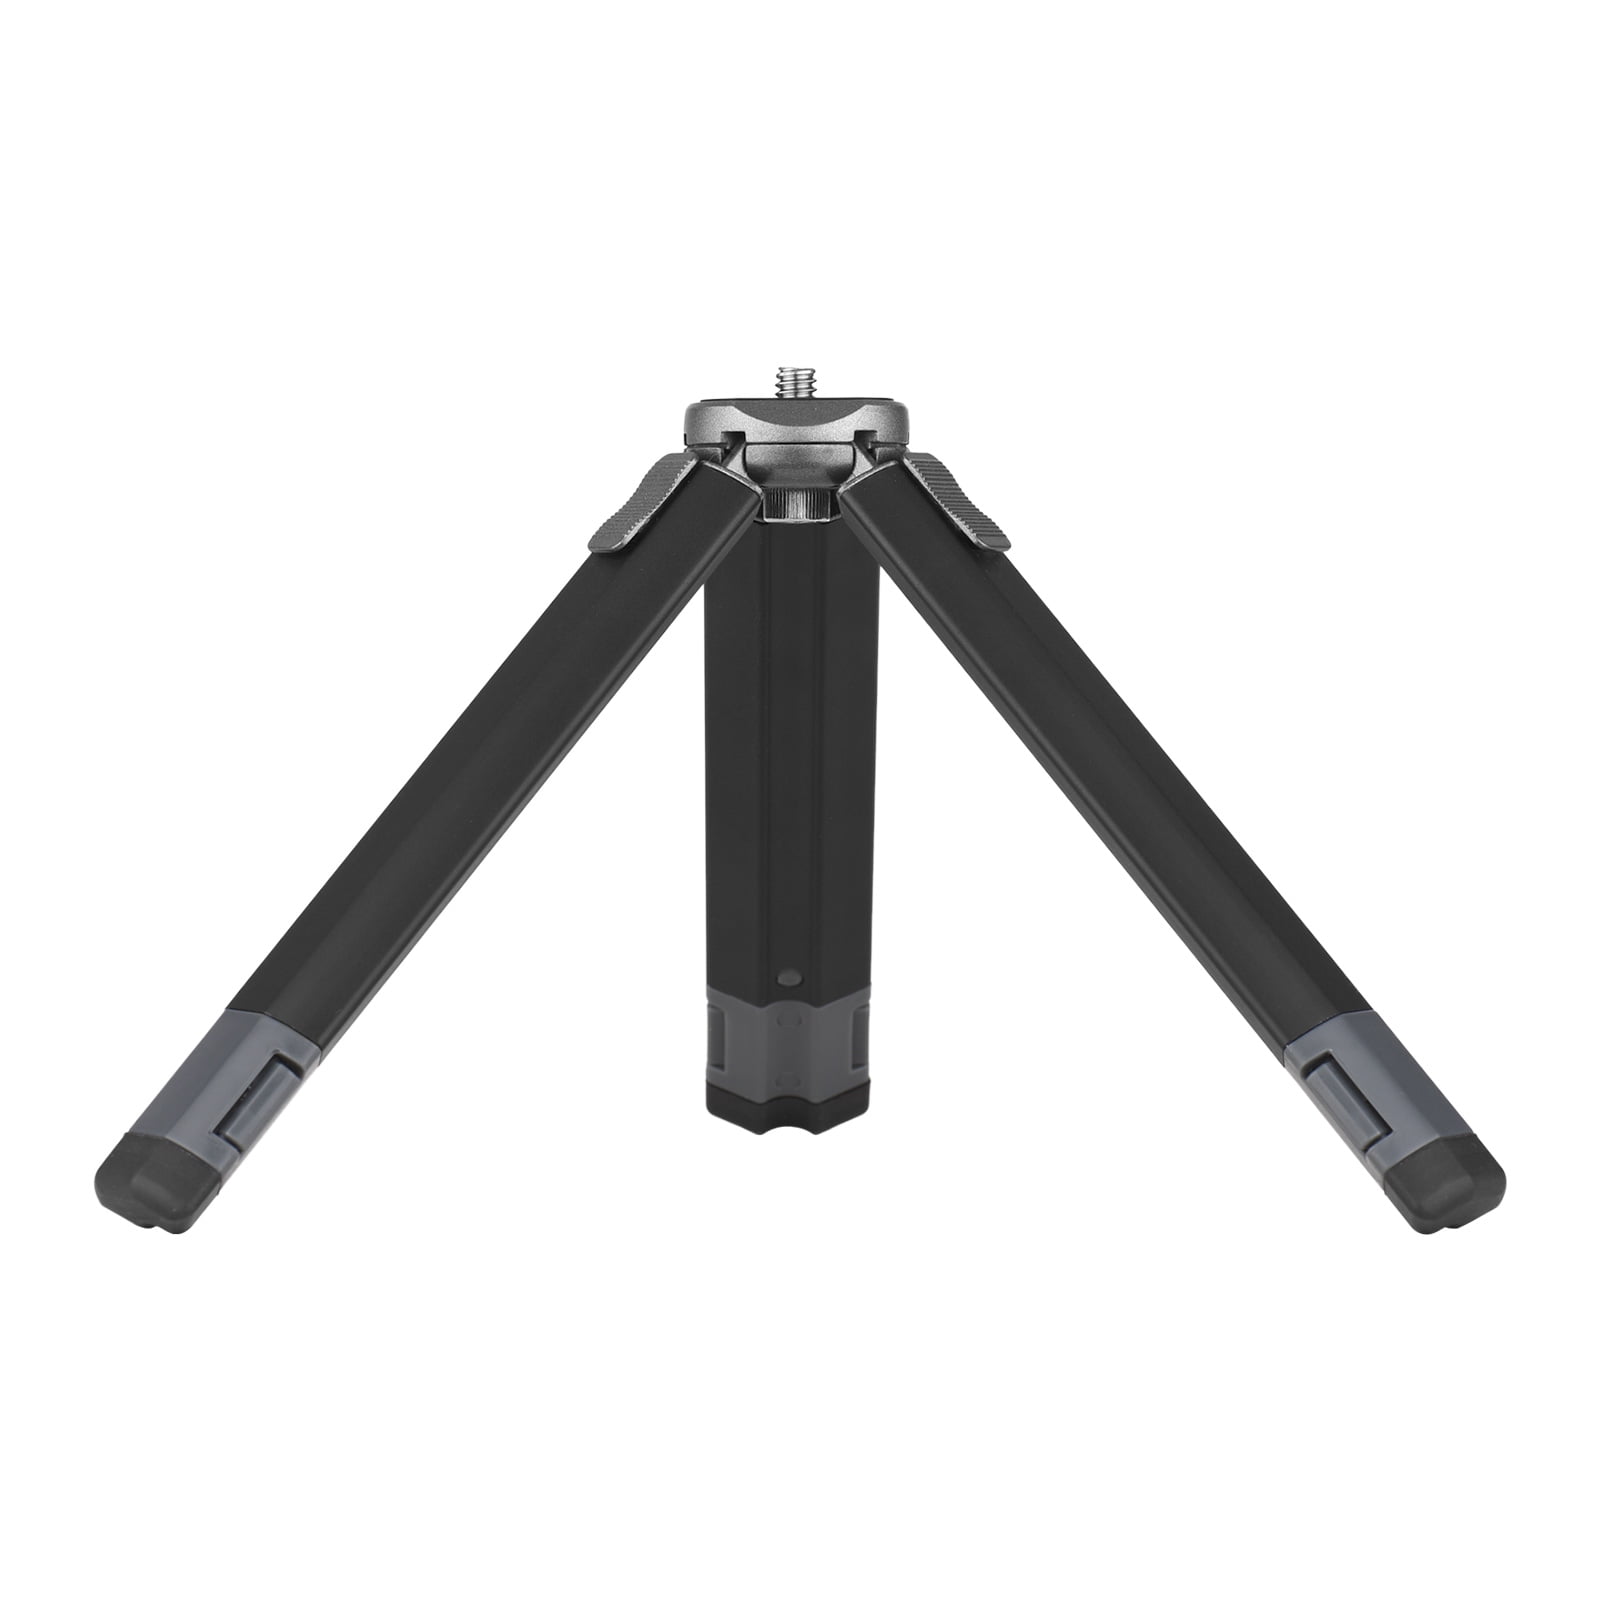 GOTICAL Tactical 6 to 9 Inch Low Profile Bipod Universal Adjustable Height with 